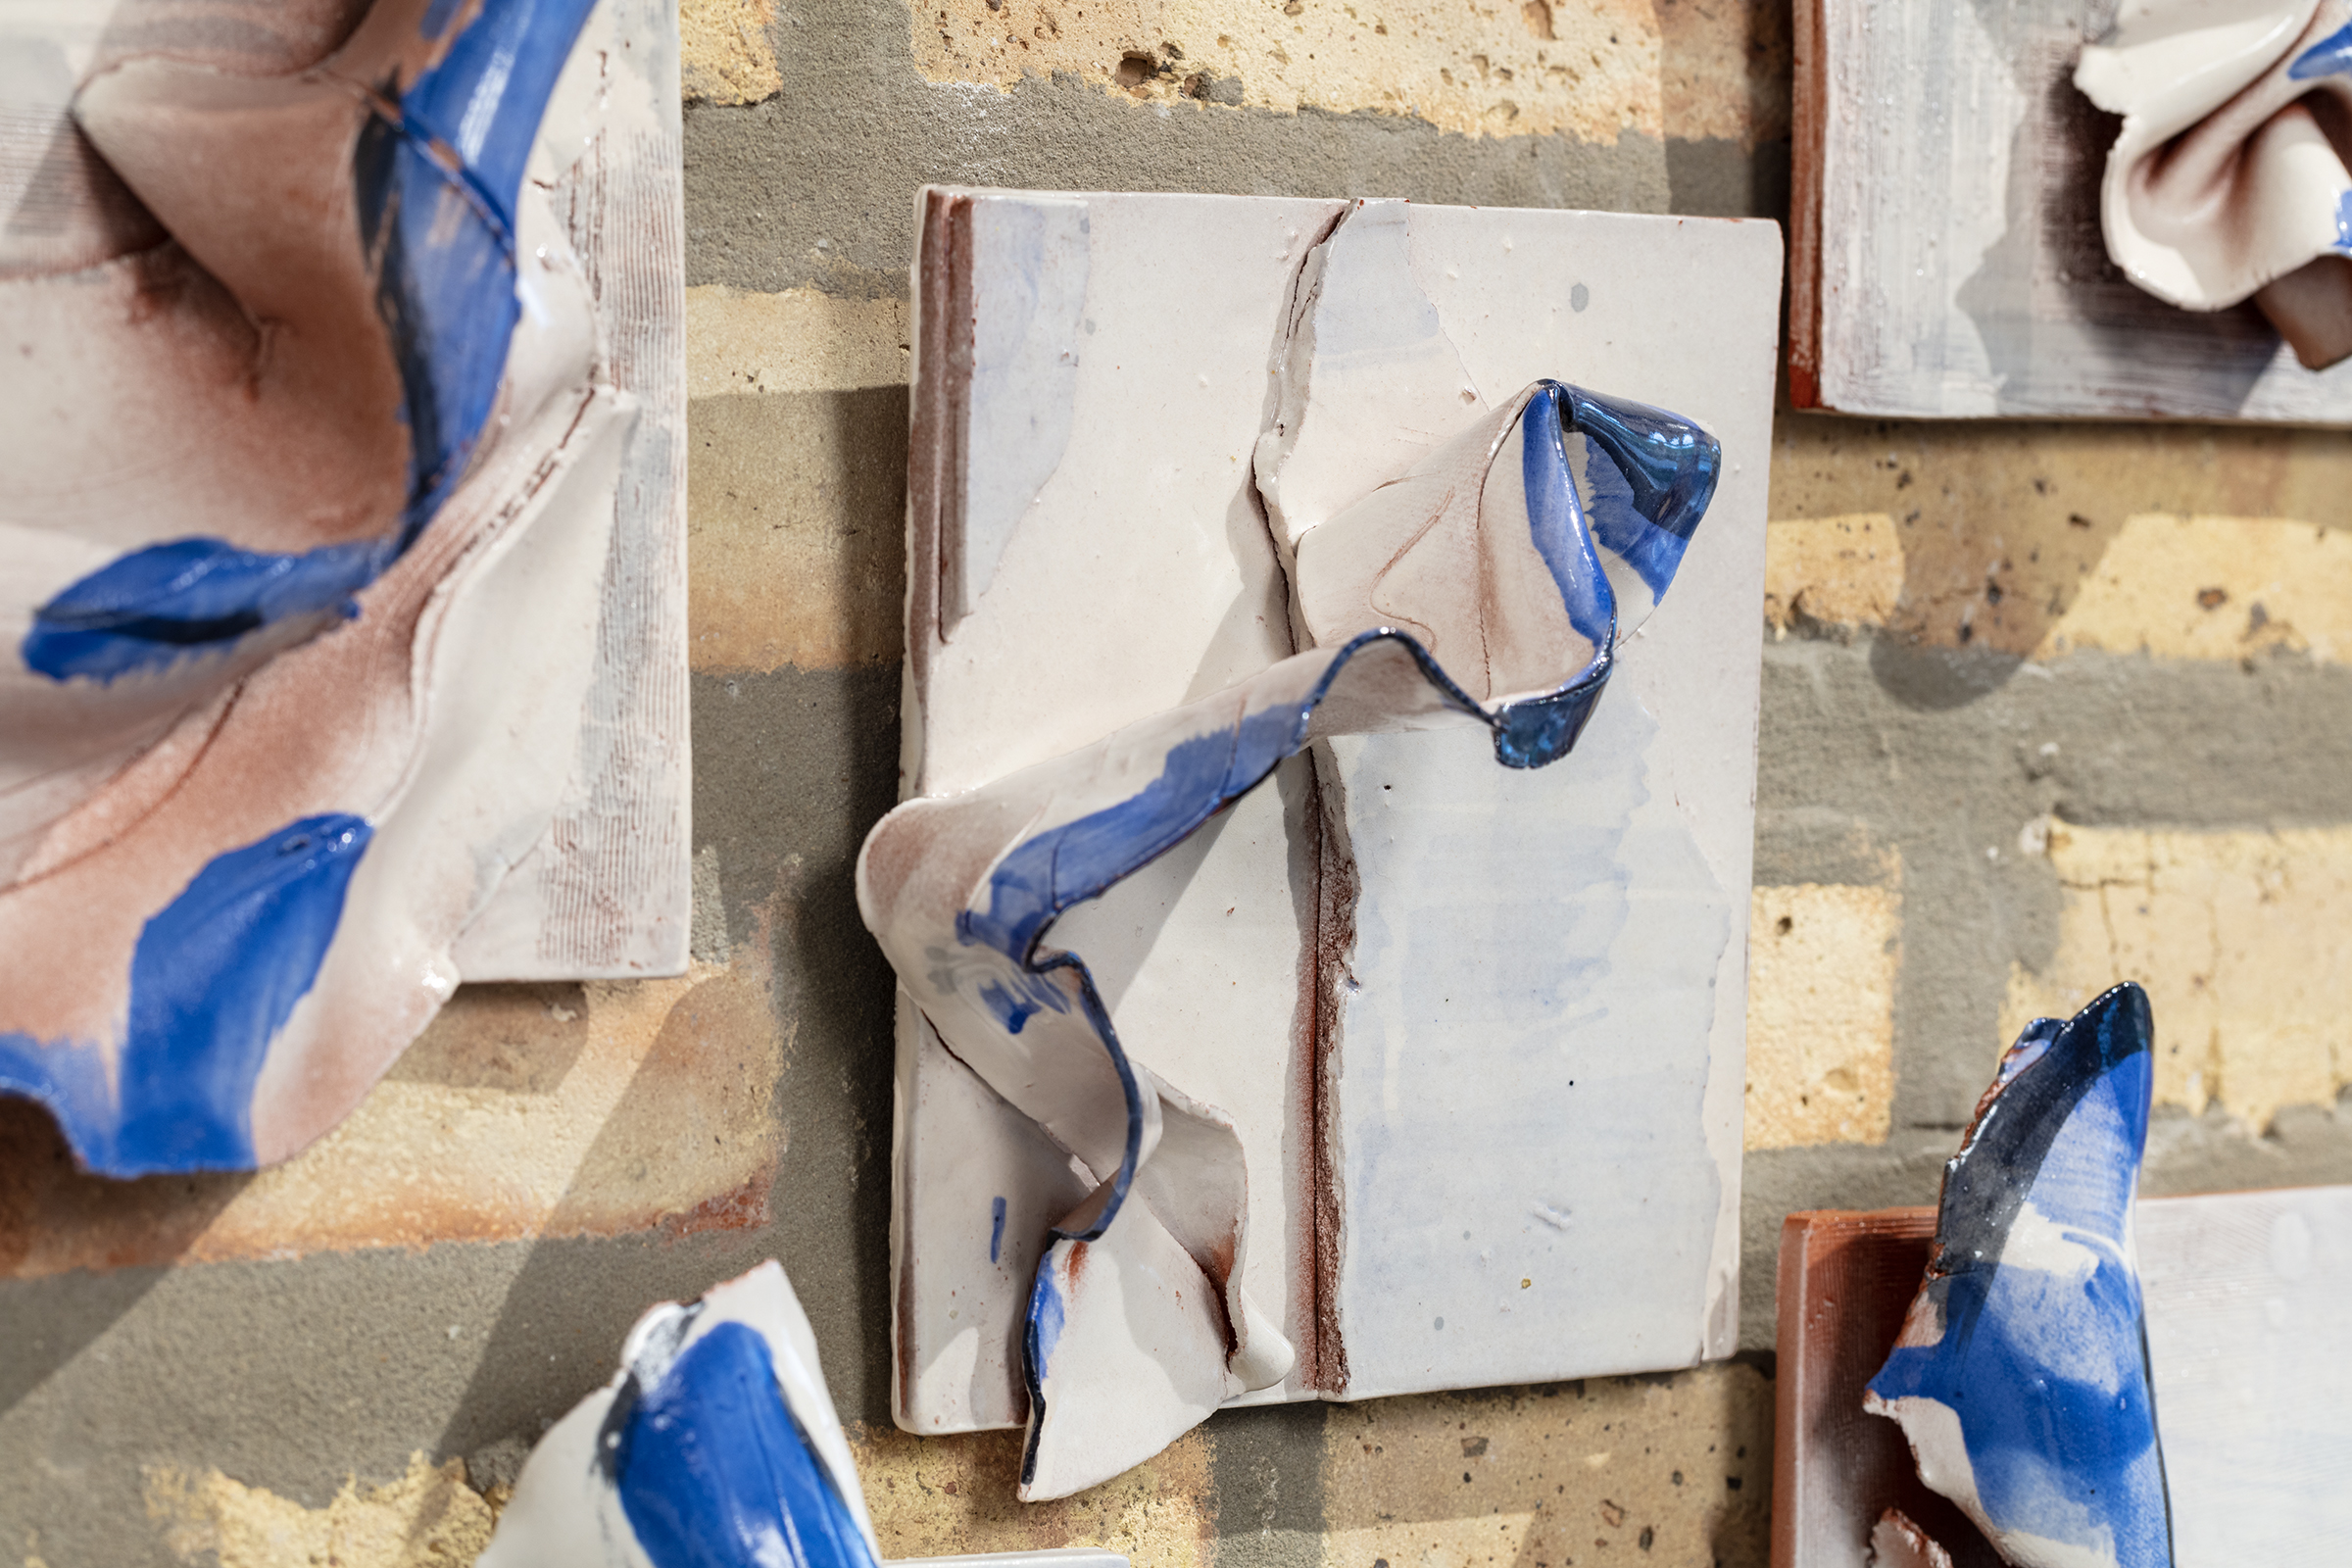 Image: On a brick wall, several of Nanxi Jin's sculptures hang. Each has a beige concrete square back and protruding beige elements, accented by a rich blue. Photo courtesy of the artist.